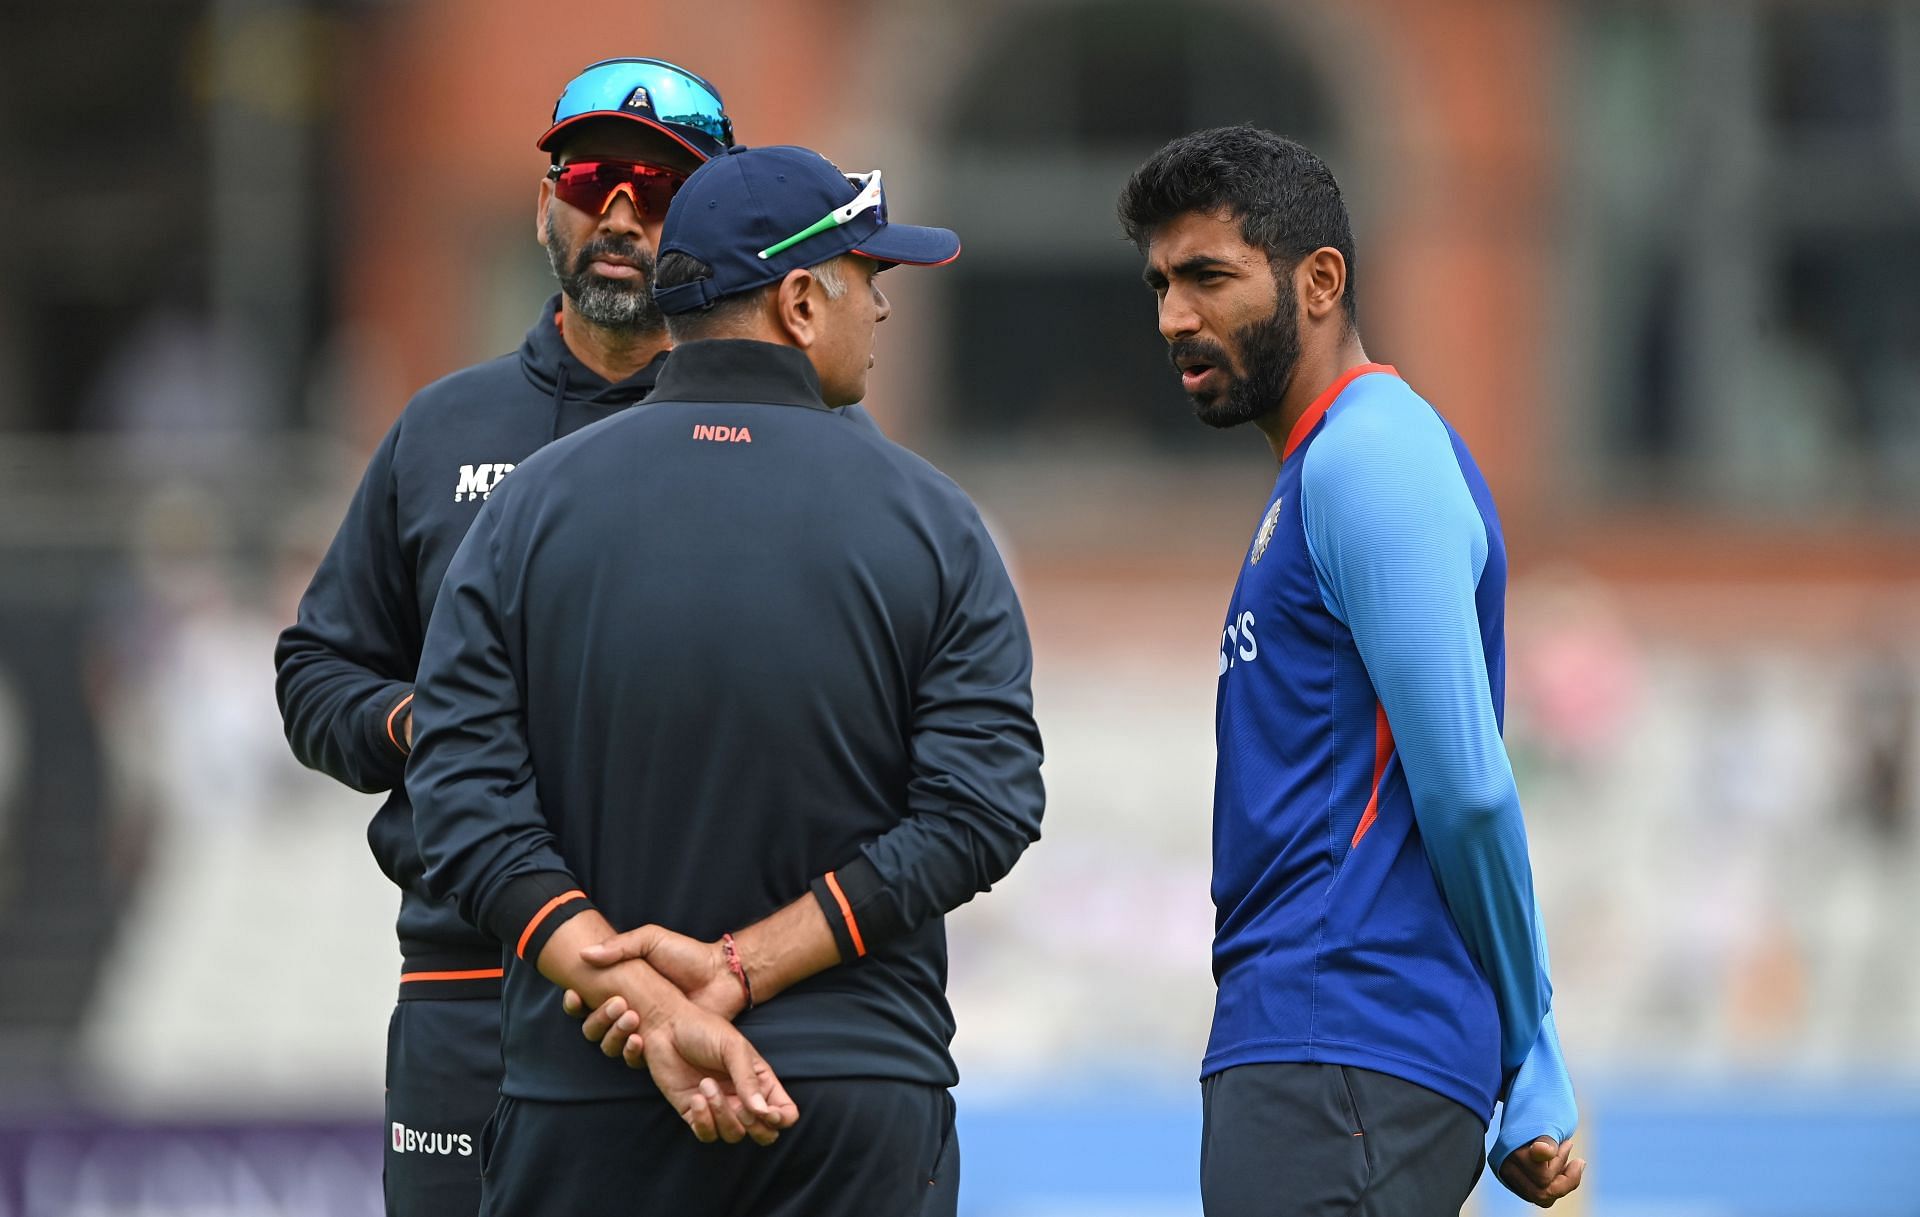 Jasprit Bumrah missed the final ODI against England due to an injury